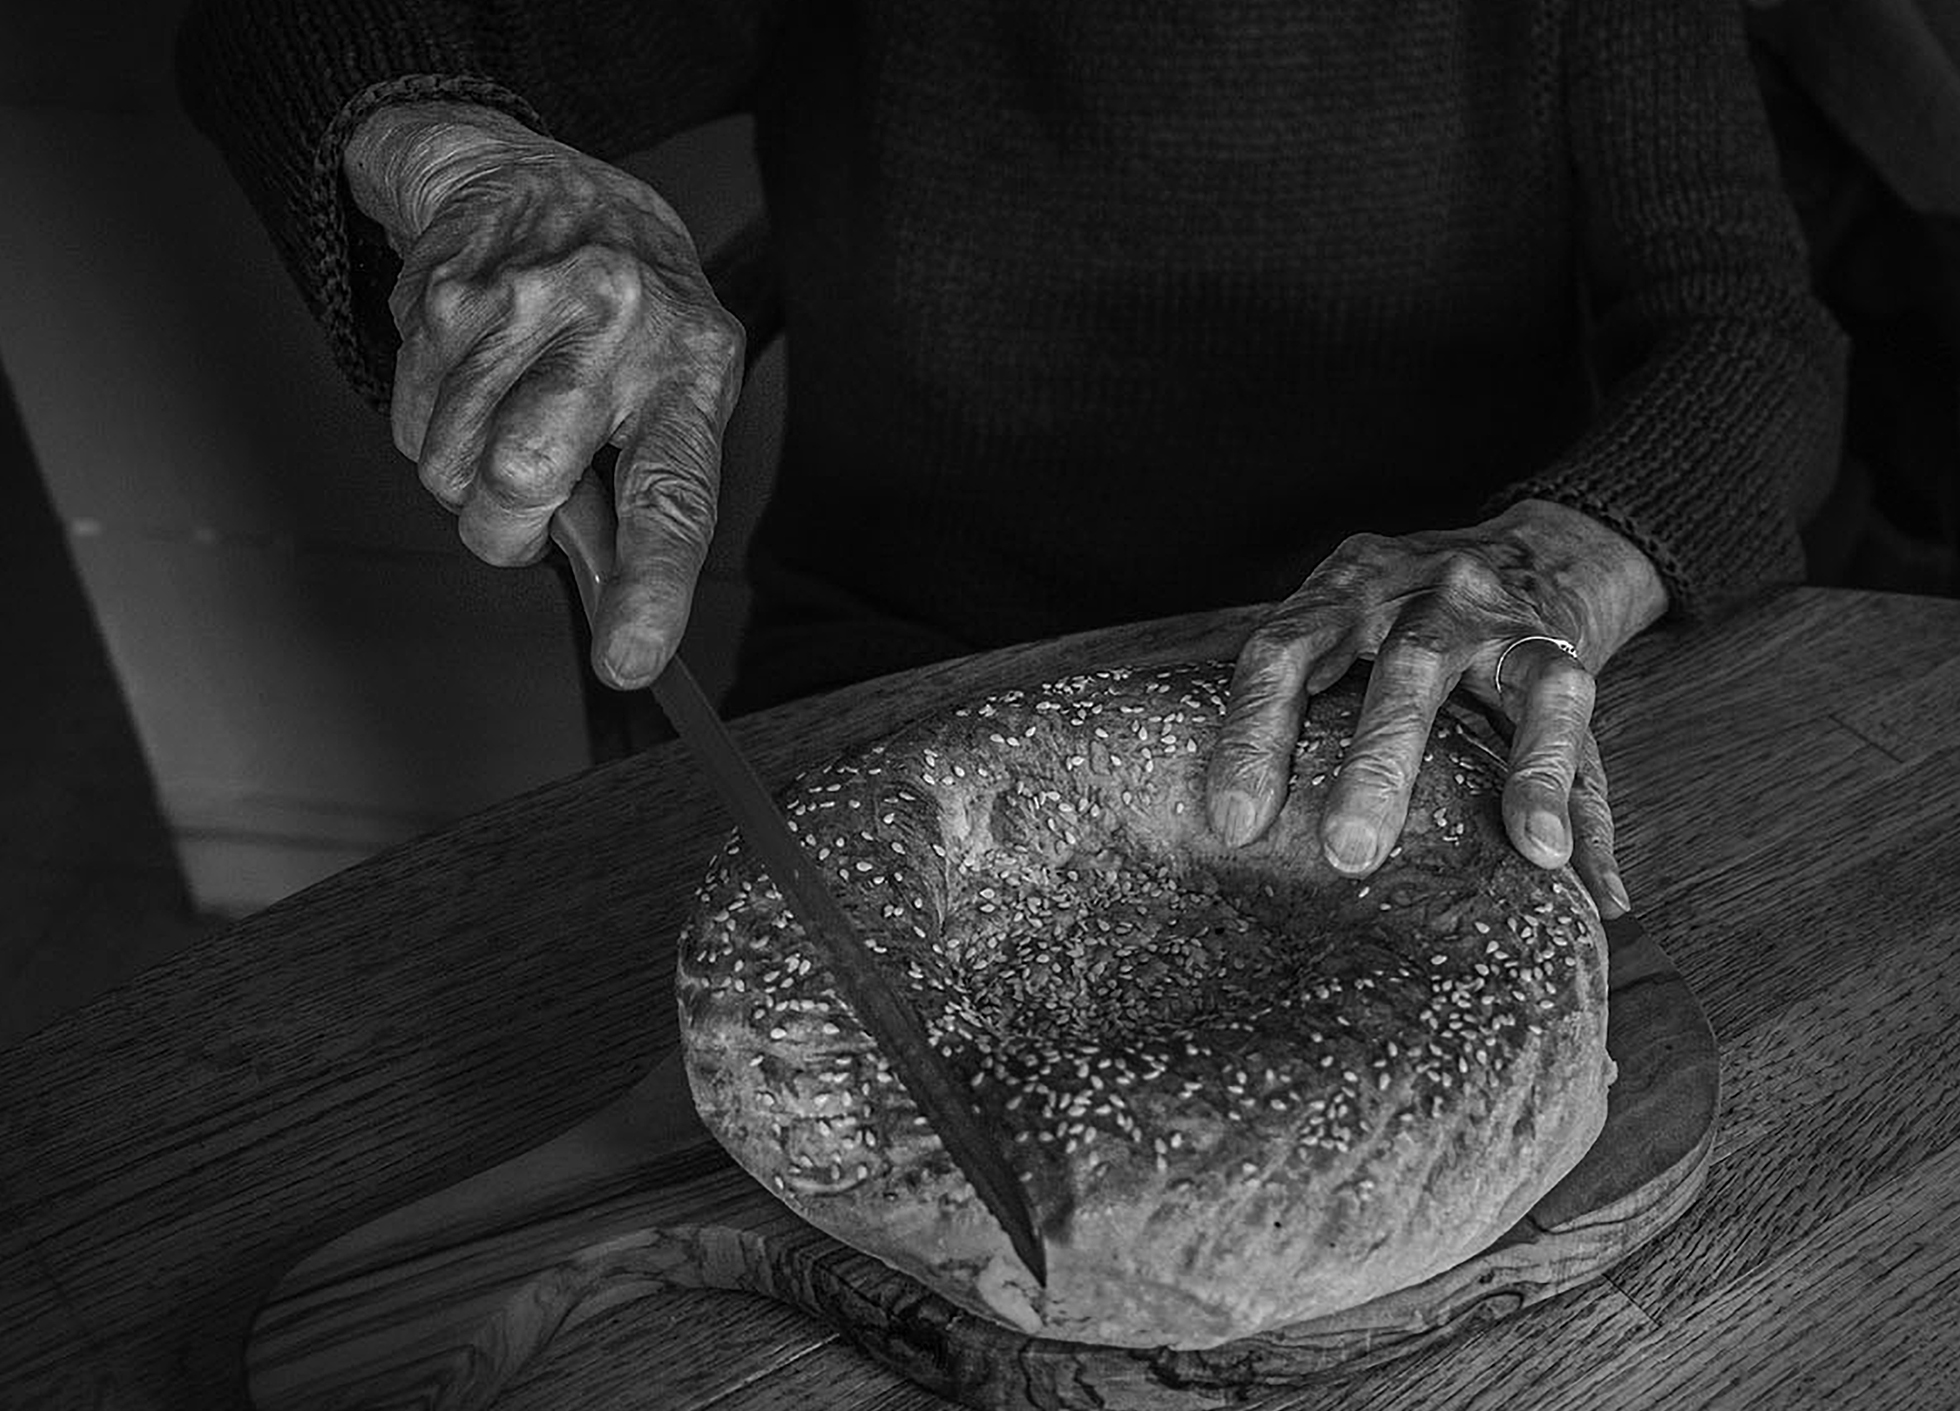 A close-up of an old person’s hands as they cut into freshly baked bread that’s been sprinkled with seeds.